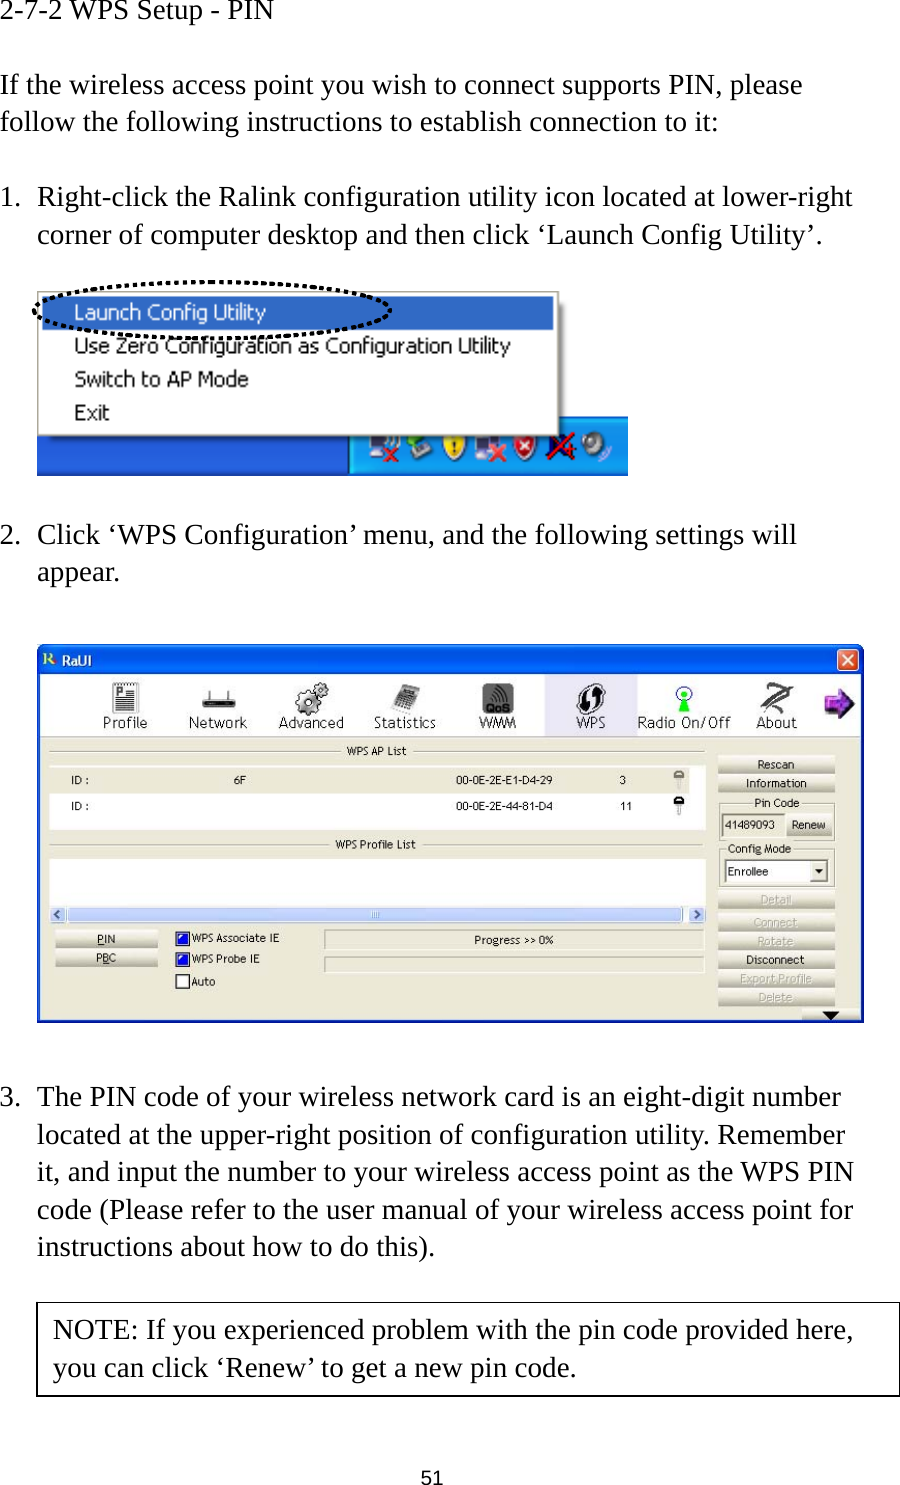  51 2-7-2 WPS Setup - PIN  If the wireless access point you wish to connect supports PIN, please follow the following instructions to establish connection to it:  1. Right-click the Ralink configuration utility icon located at lower-right corner of computer desktop and then click ‘Launch Config Utility’.    2. Click ‘WPS Configuration’ menu, and the following settings will appear.    3. The PIN code of your wireless network card is an eight-digit number located at the upper-right position of configuration utility. Remember it, and input the number to your wireless access point as the WPS PIN code (Please refer to the user manual of your wireless access point for instructions about how to do this).     NOTE: If you experienced problem with the pin code provided here, you can click ‘Renew’ to get a new pin code. 